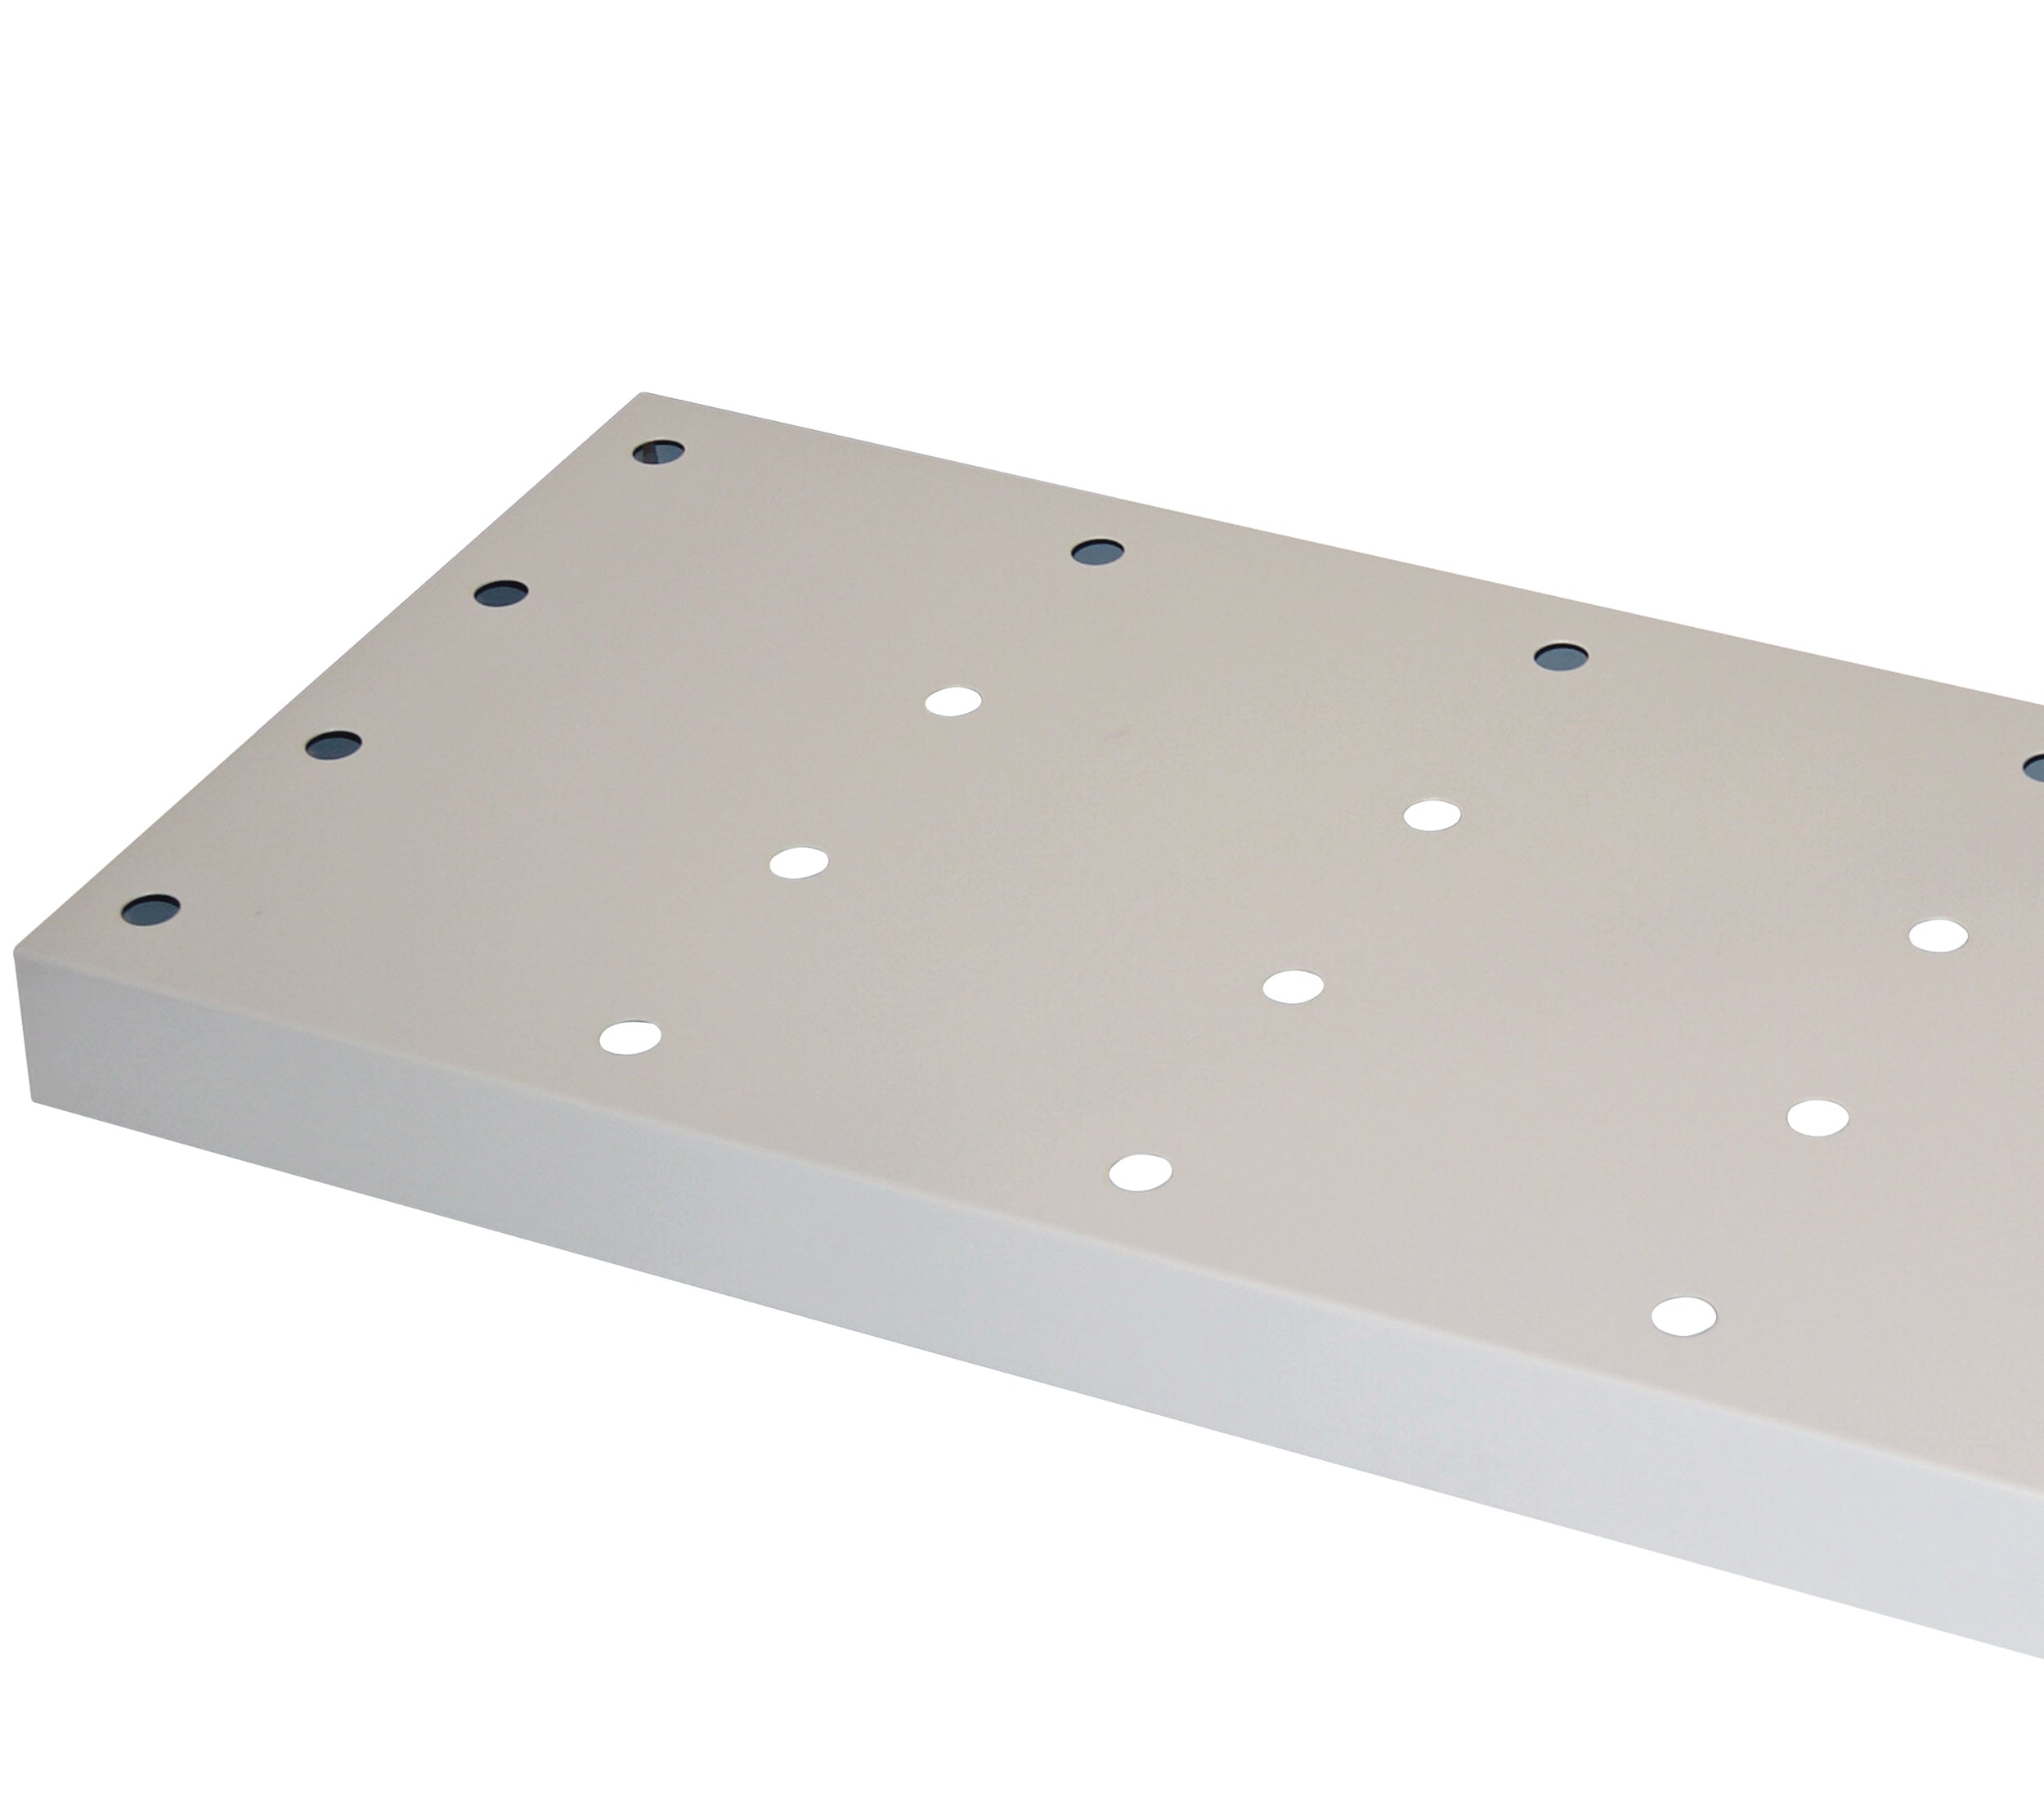 Perforated insert standard for model(s): Q90, S90 with width 1200 mm, sheet steel powder-coated smooth